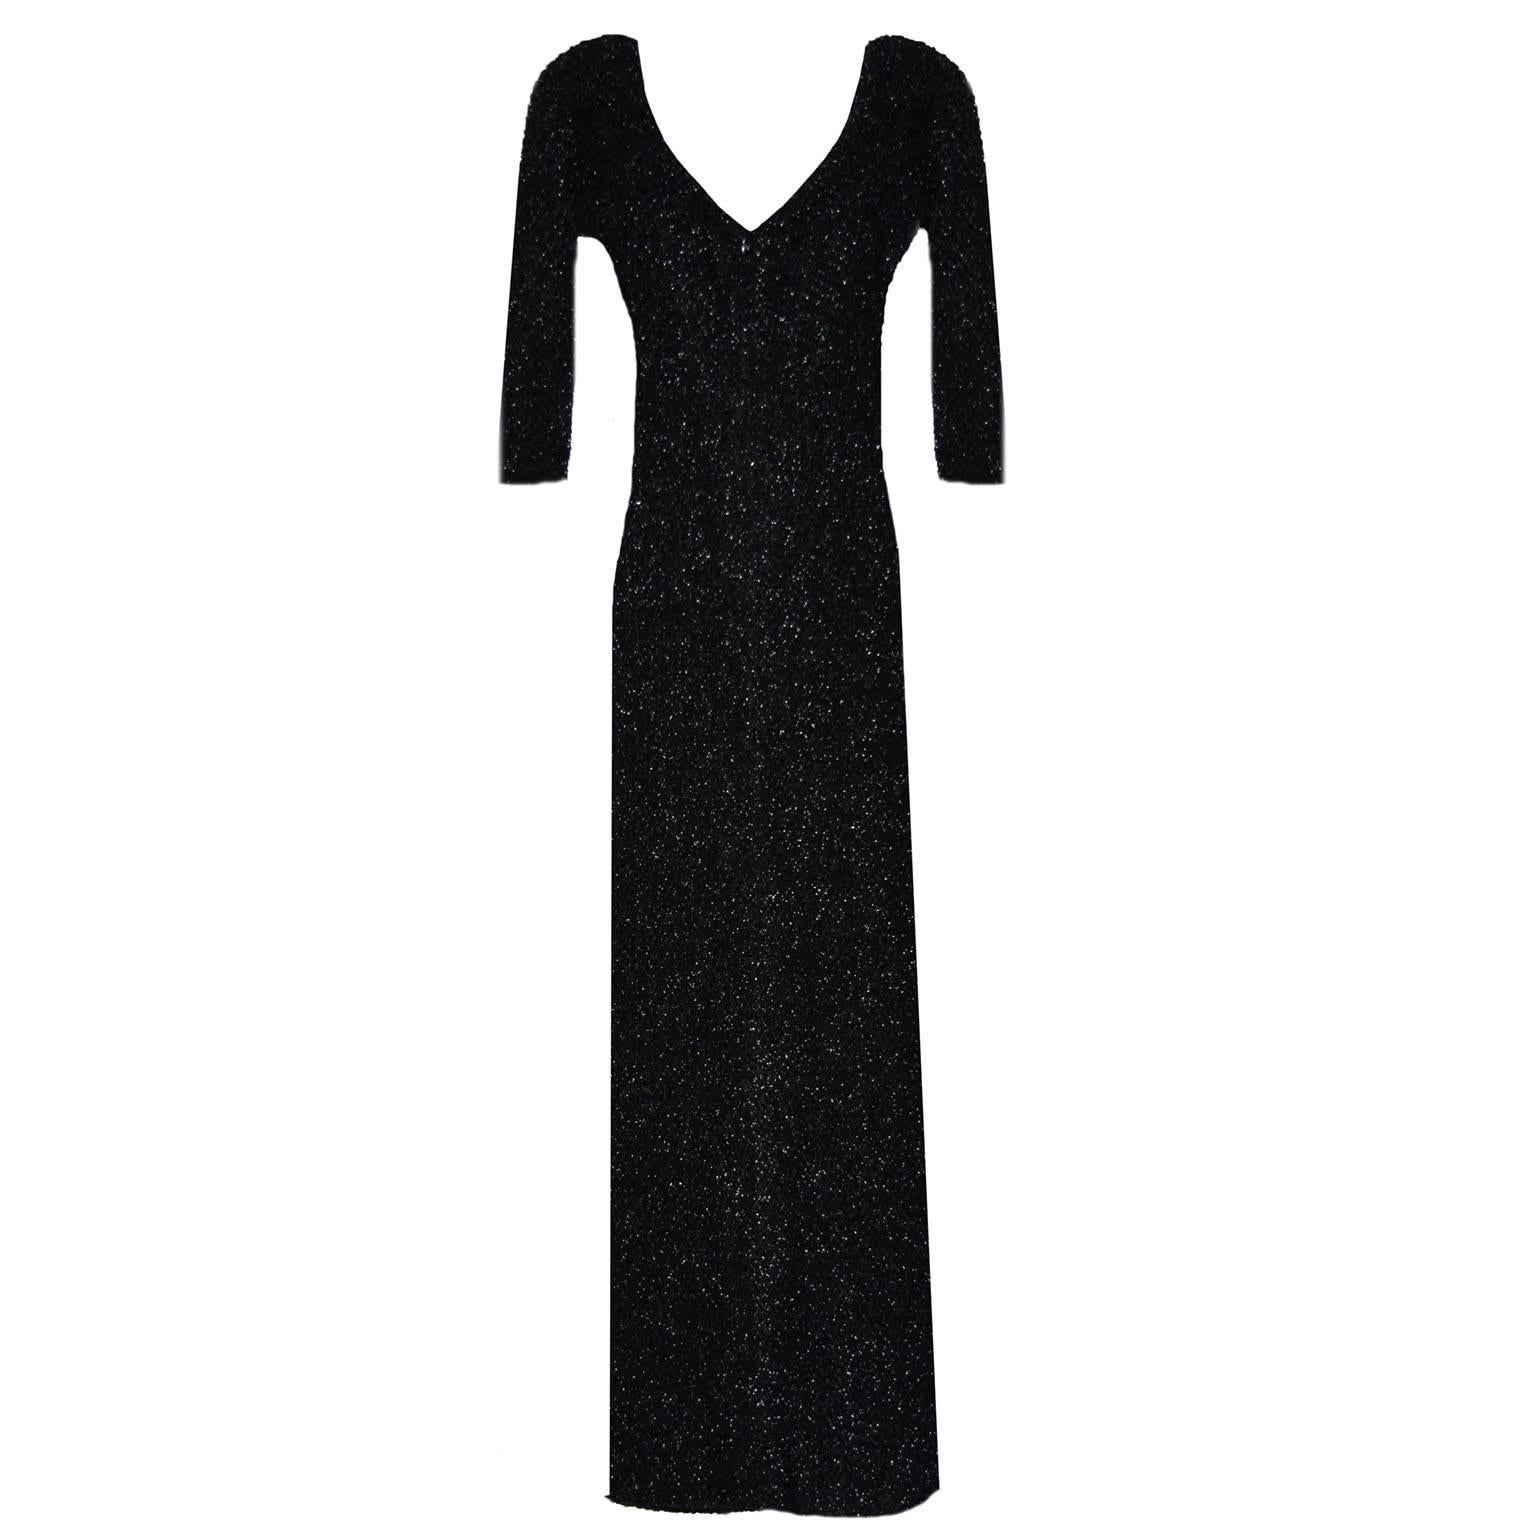 This fabulous Yeohlee Evening Maxi is one of a kind. Made with metallic Tencel gives it a lustrous hand and far away perception. The dress is long sleeved and maxi length, with a zipped back for a slimming elongated look. This Evening dress can be